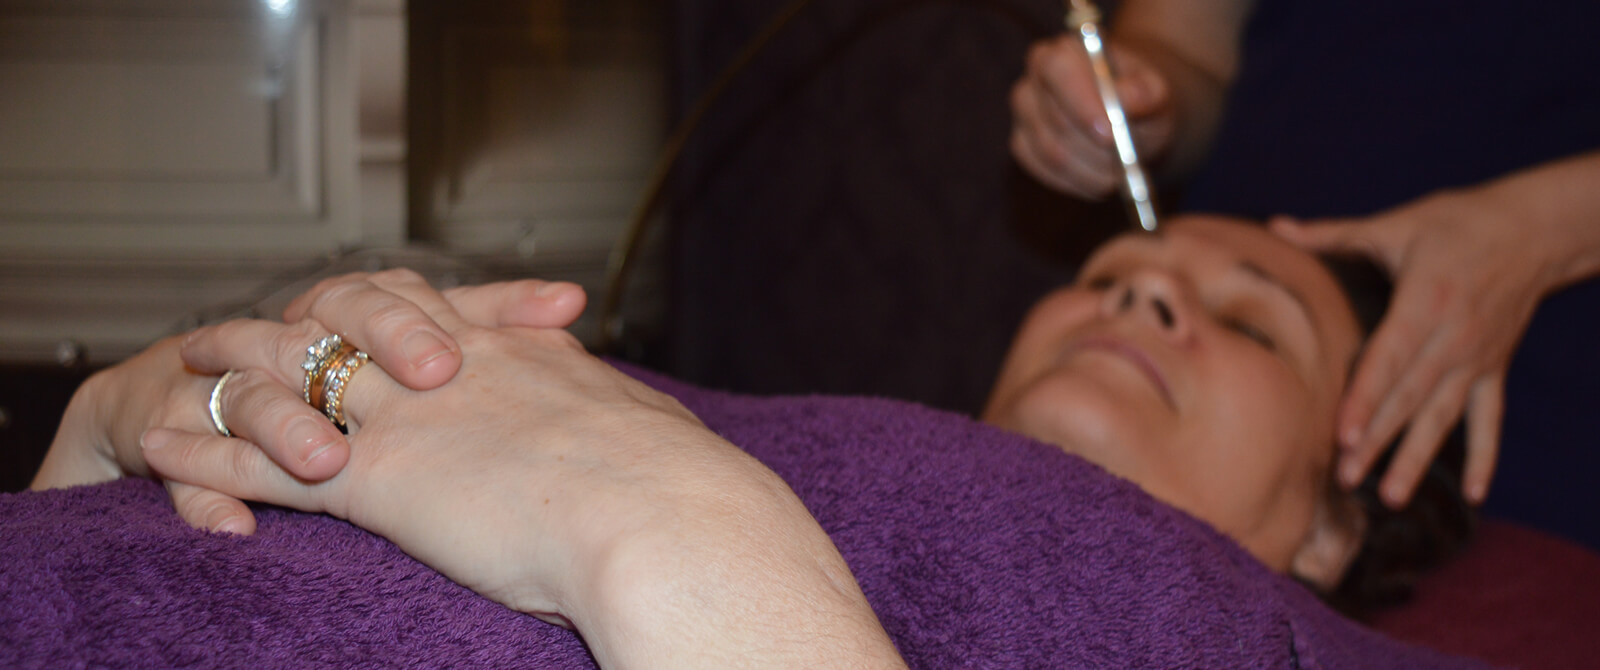 Microdermabrasion treatments